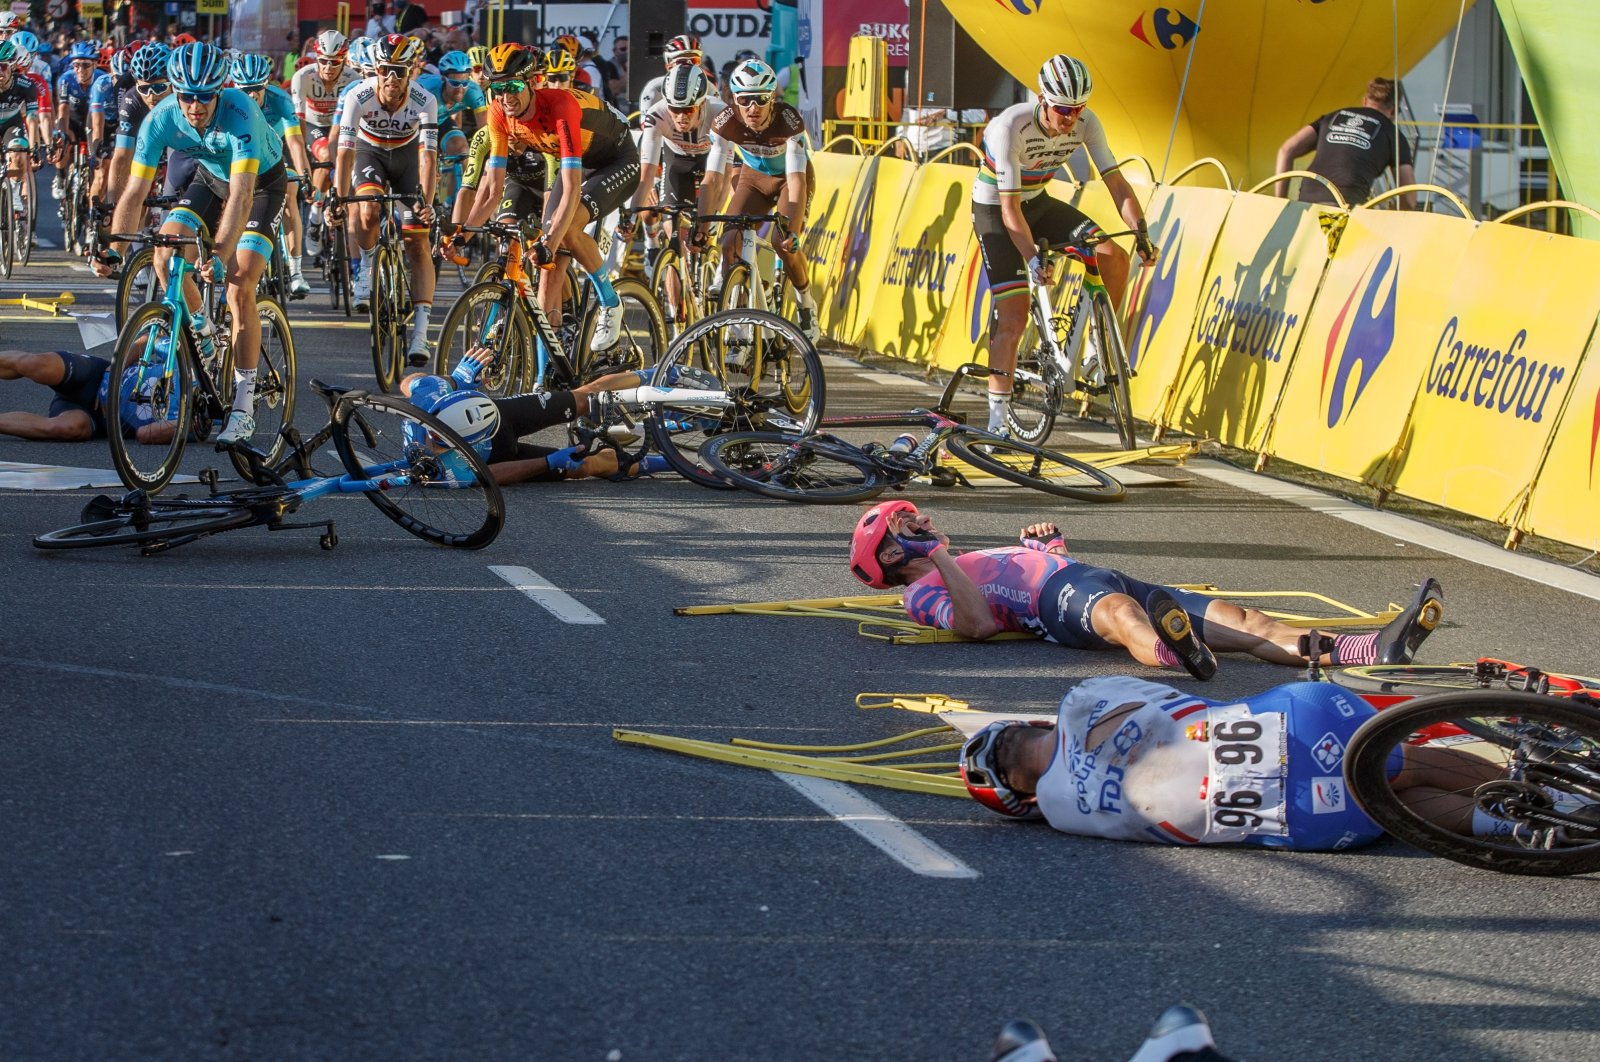 Cyclists lie on the street following a crash in the sprint during the Tour of Poland cycling race, between Chorzow and Katowice, Poland, Aug. 5, 2020. (EPA Photo)